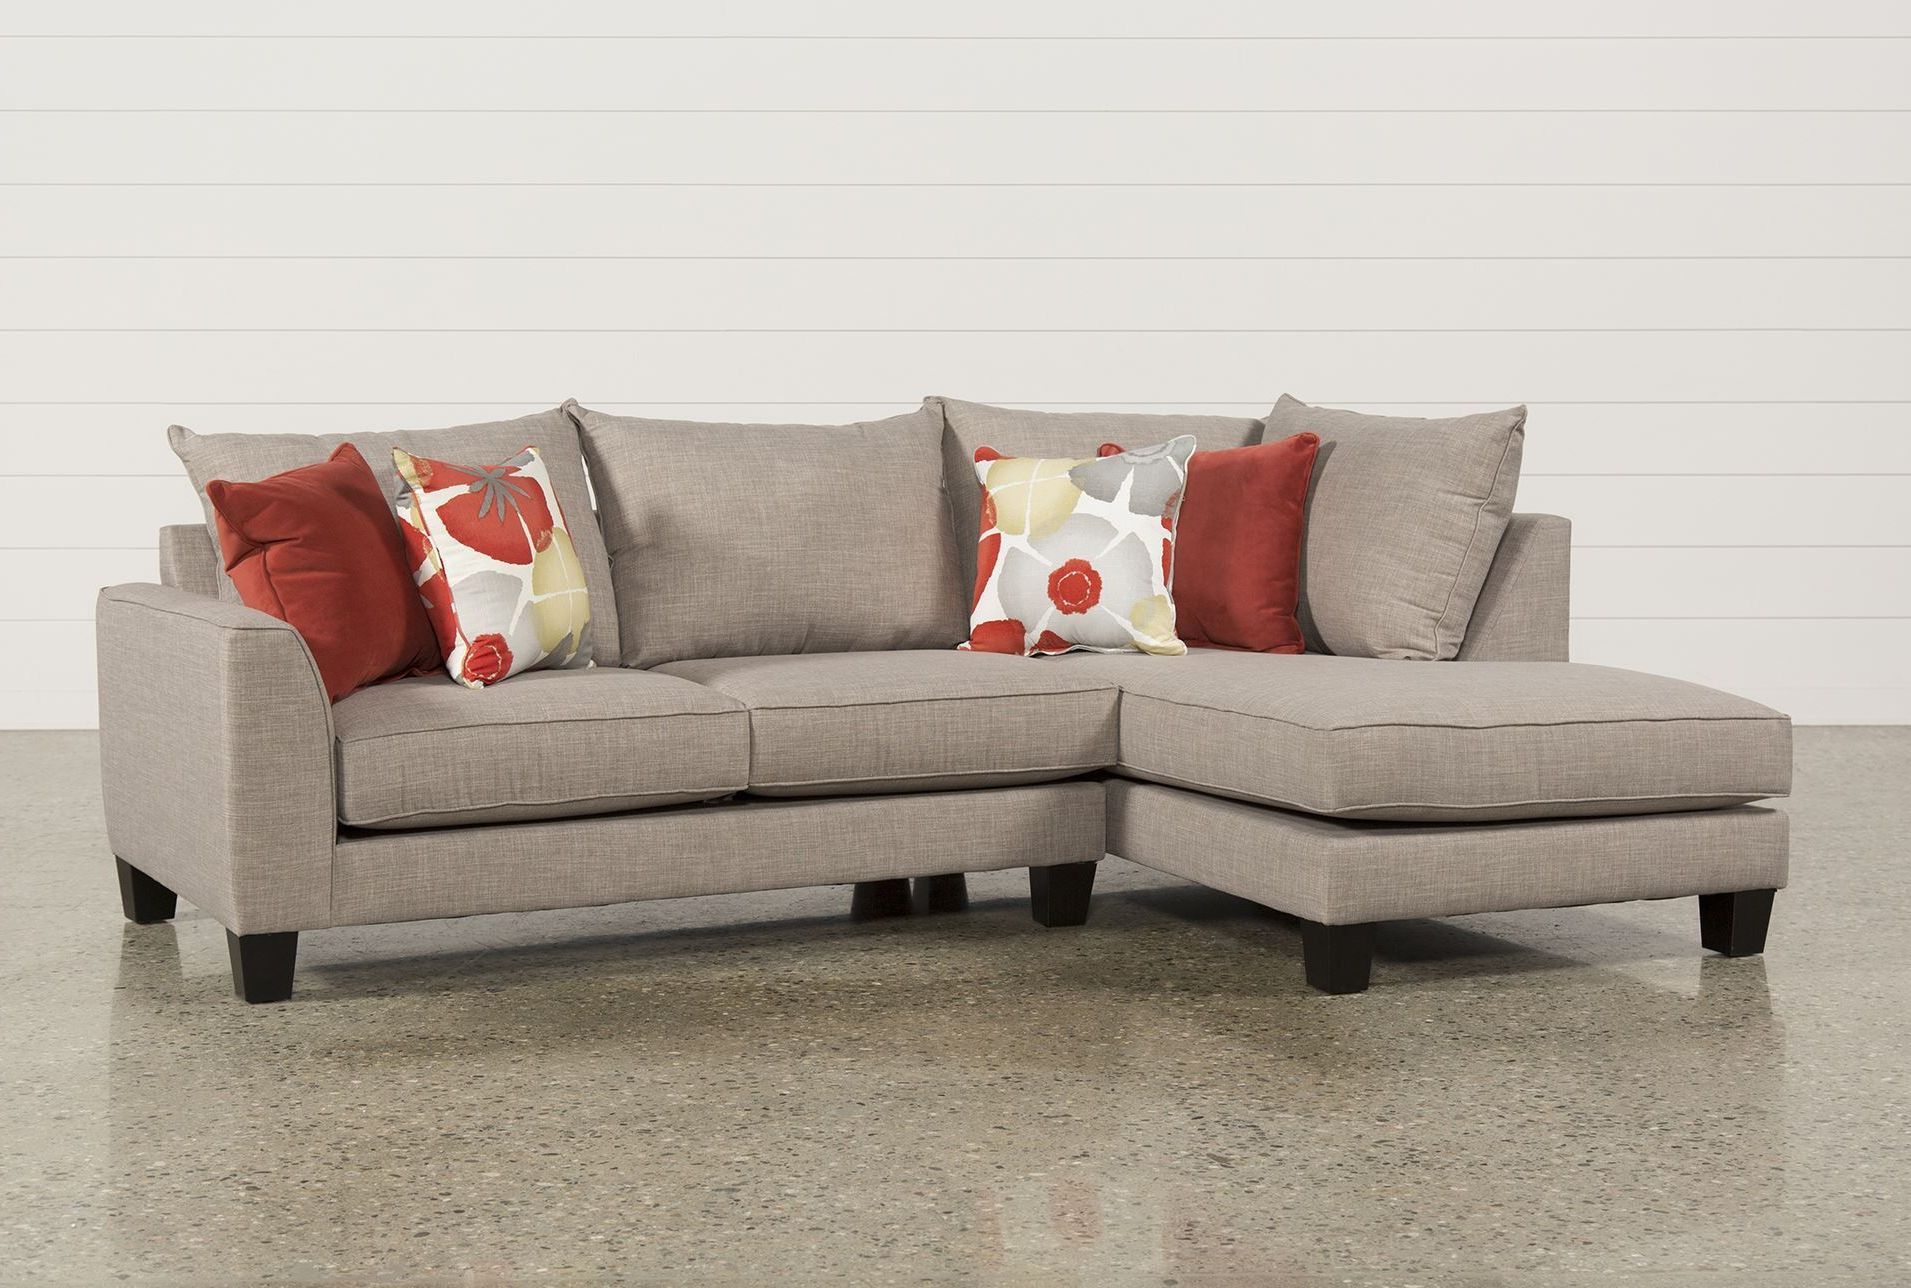 Trendy Ideas Of Laf Chaise On Kerri 2 Piece Sectional W Laf Chaise Living With Regard To Kerri 2 Piece Sectionals With Raf Chaise (View 10 of 20)